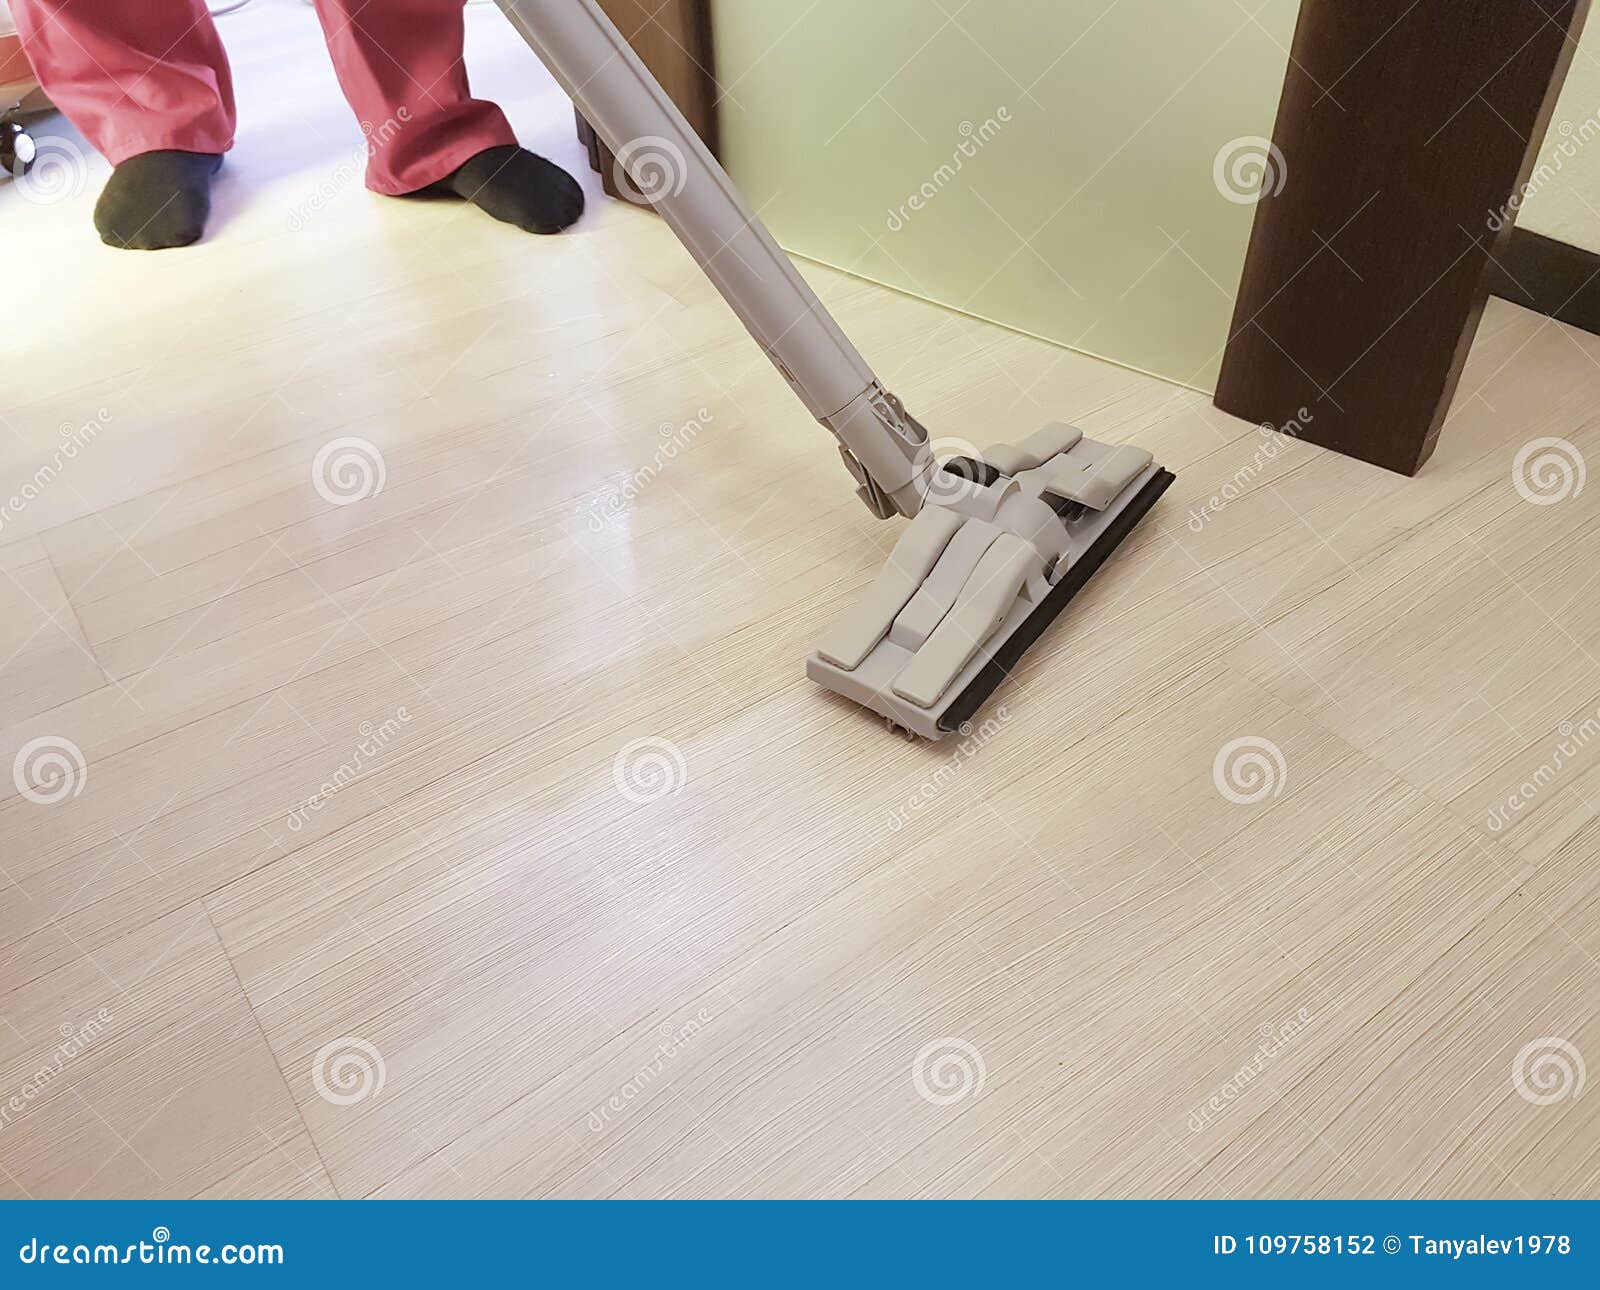 Man Vacuuming The Floor In The Room Cleaning Service Stock Photo